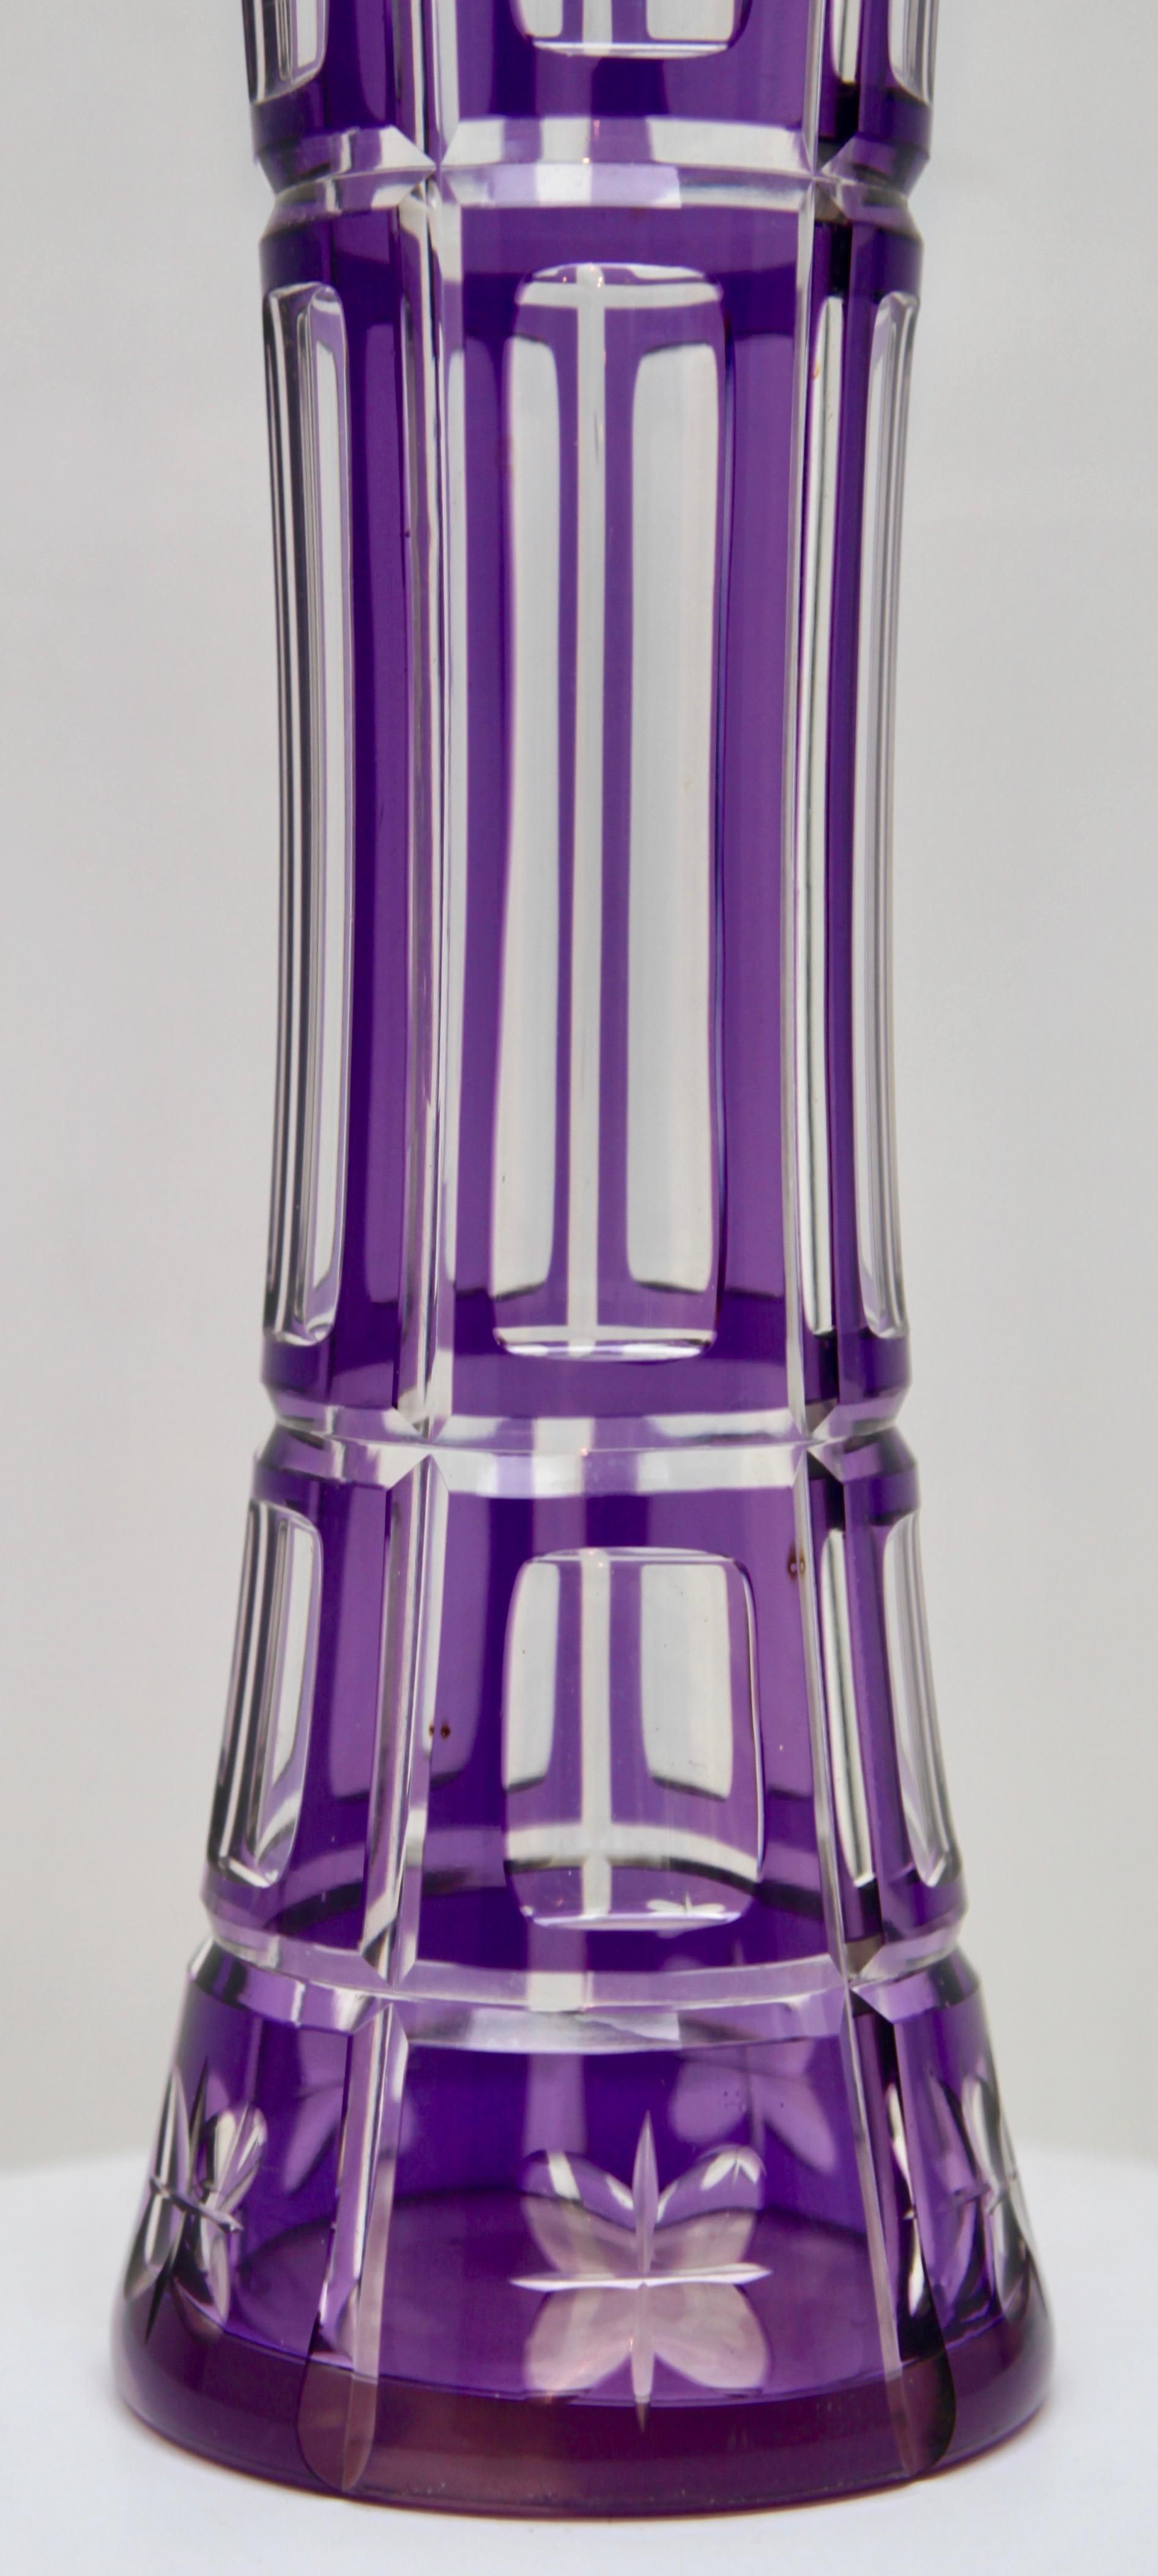 Faceted Bohemian Crystal Vase Soliflore Cut to Clear, 1950s